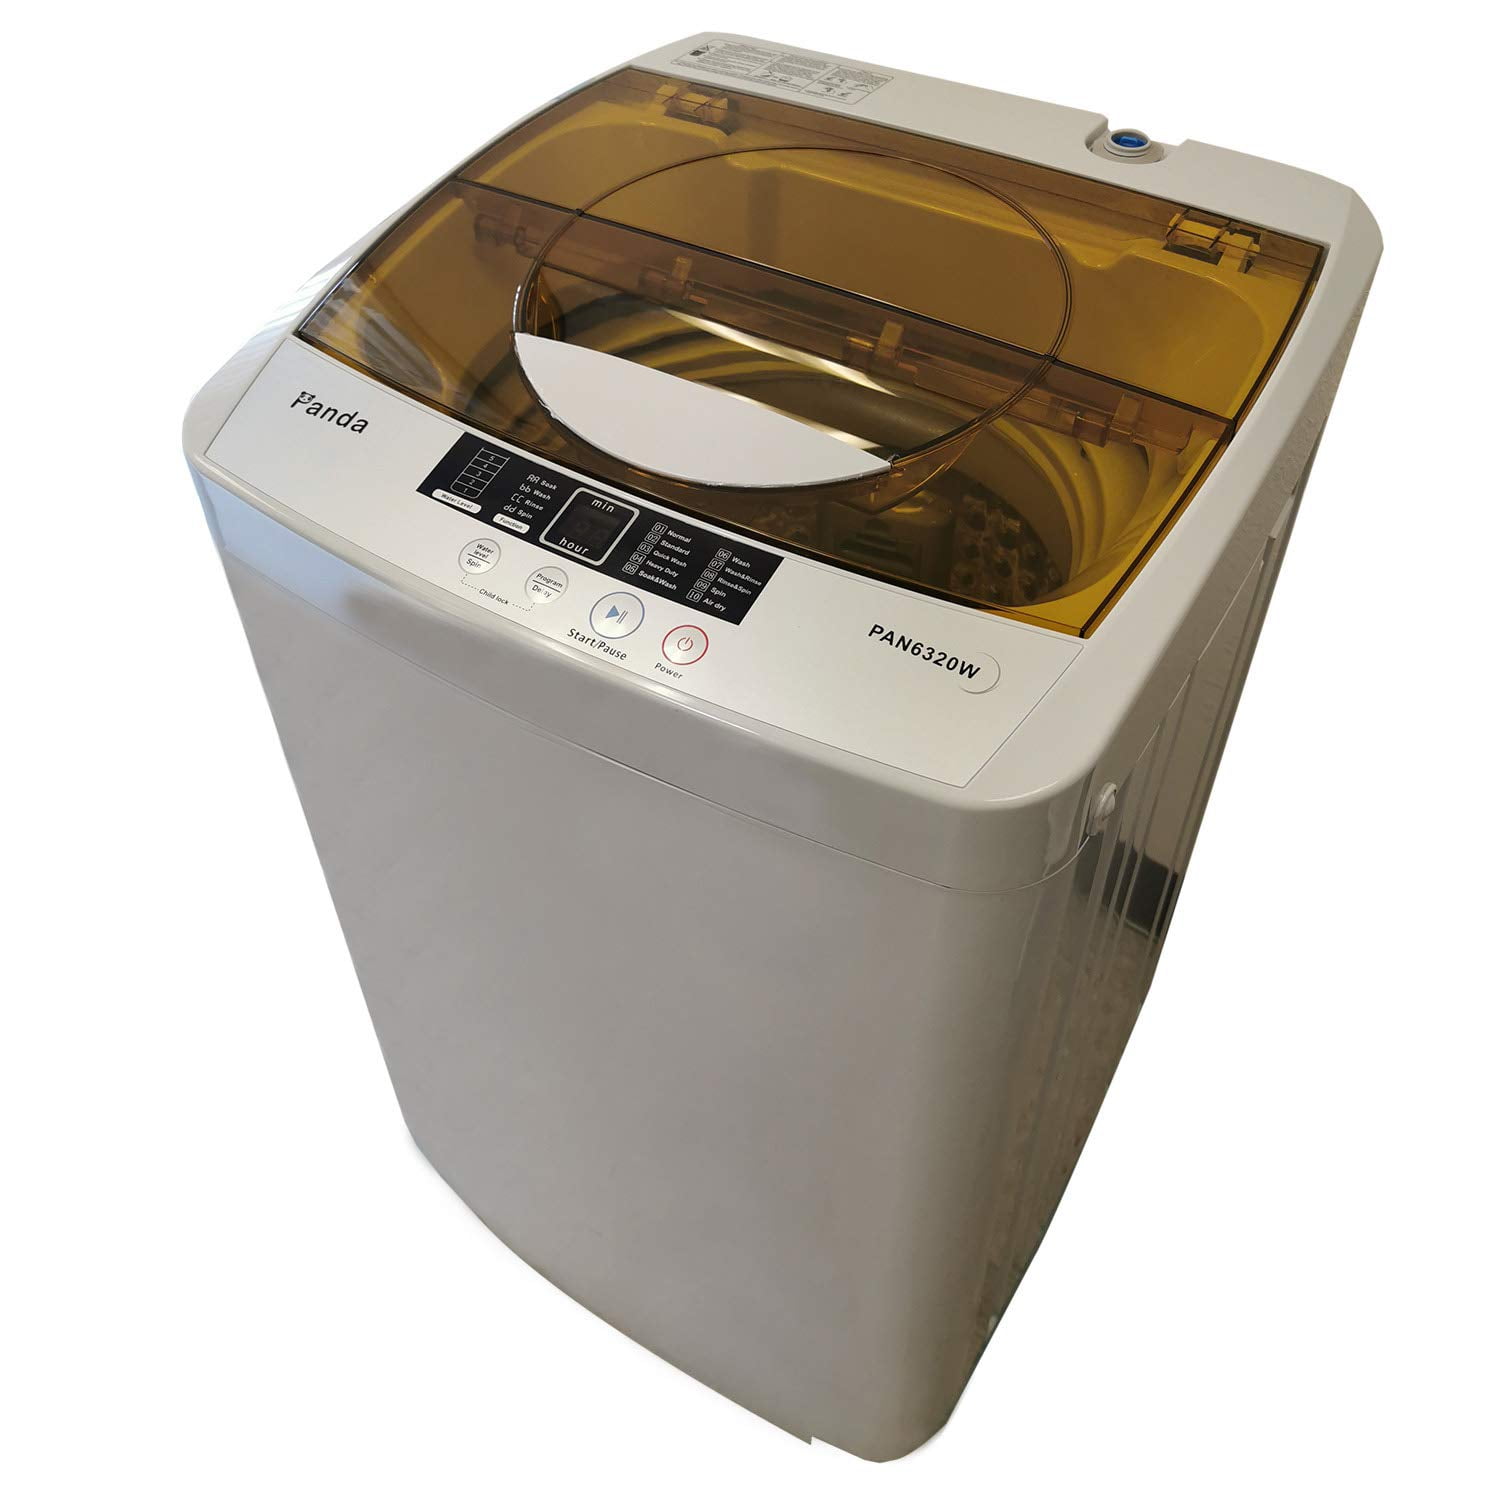 Panda Portable Washing Machine, 10lbs Capacity, 10 Wash Programs, 2 built in rollers/casters